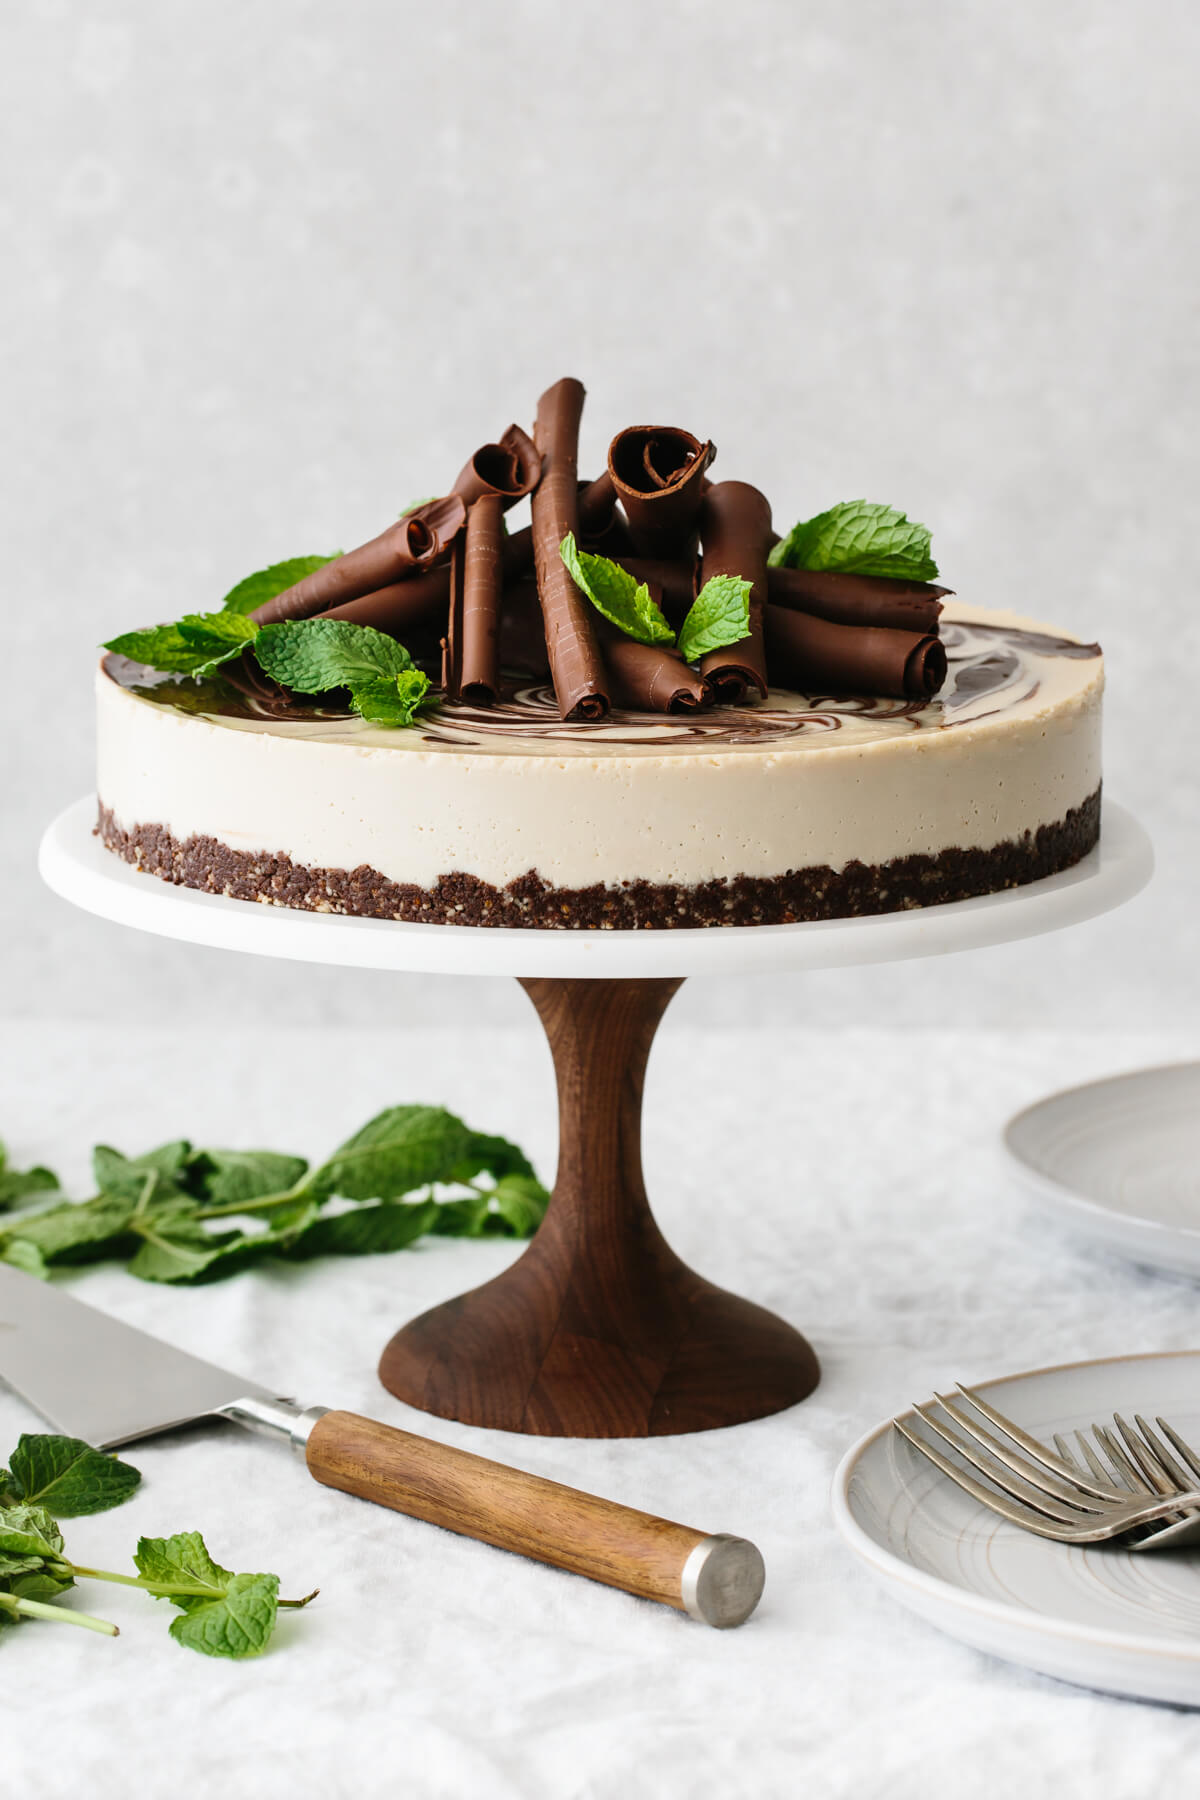 Mint chocolate vegan cheesecake on a cake stand and garnished with chocolate curls and mint leaves.